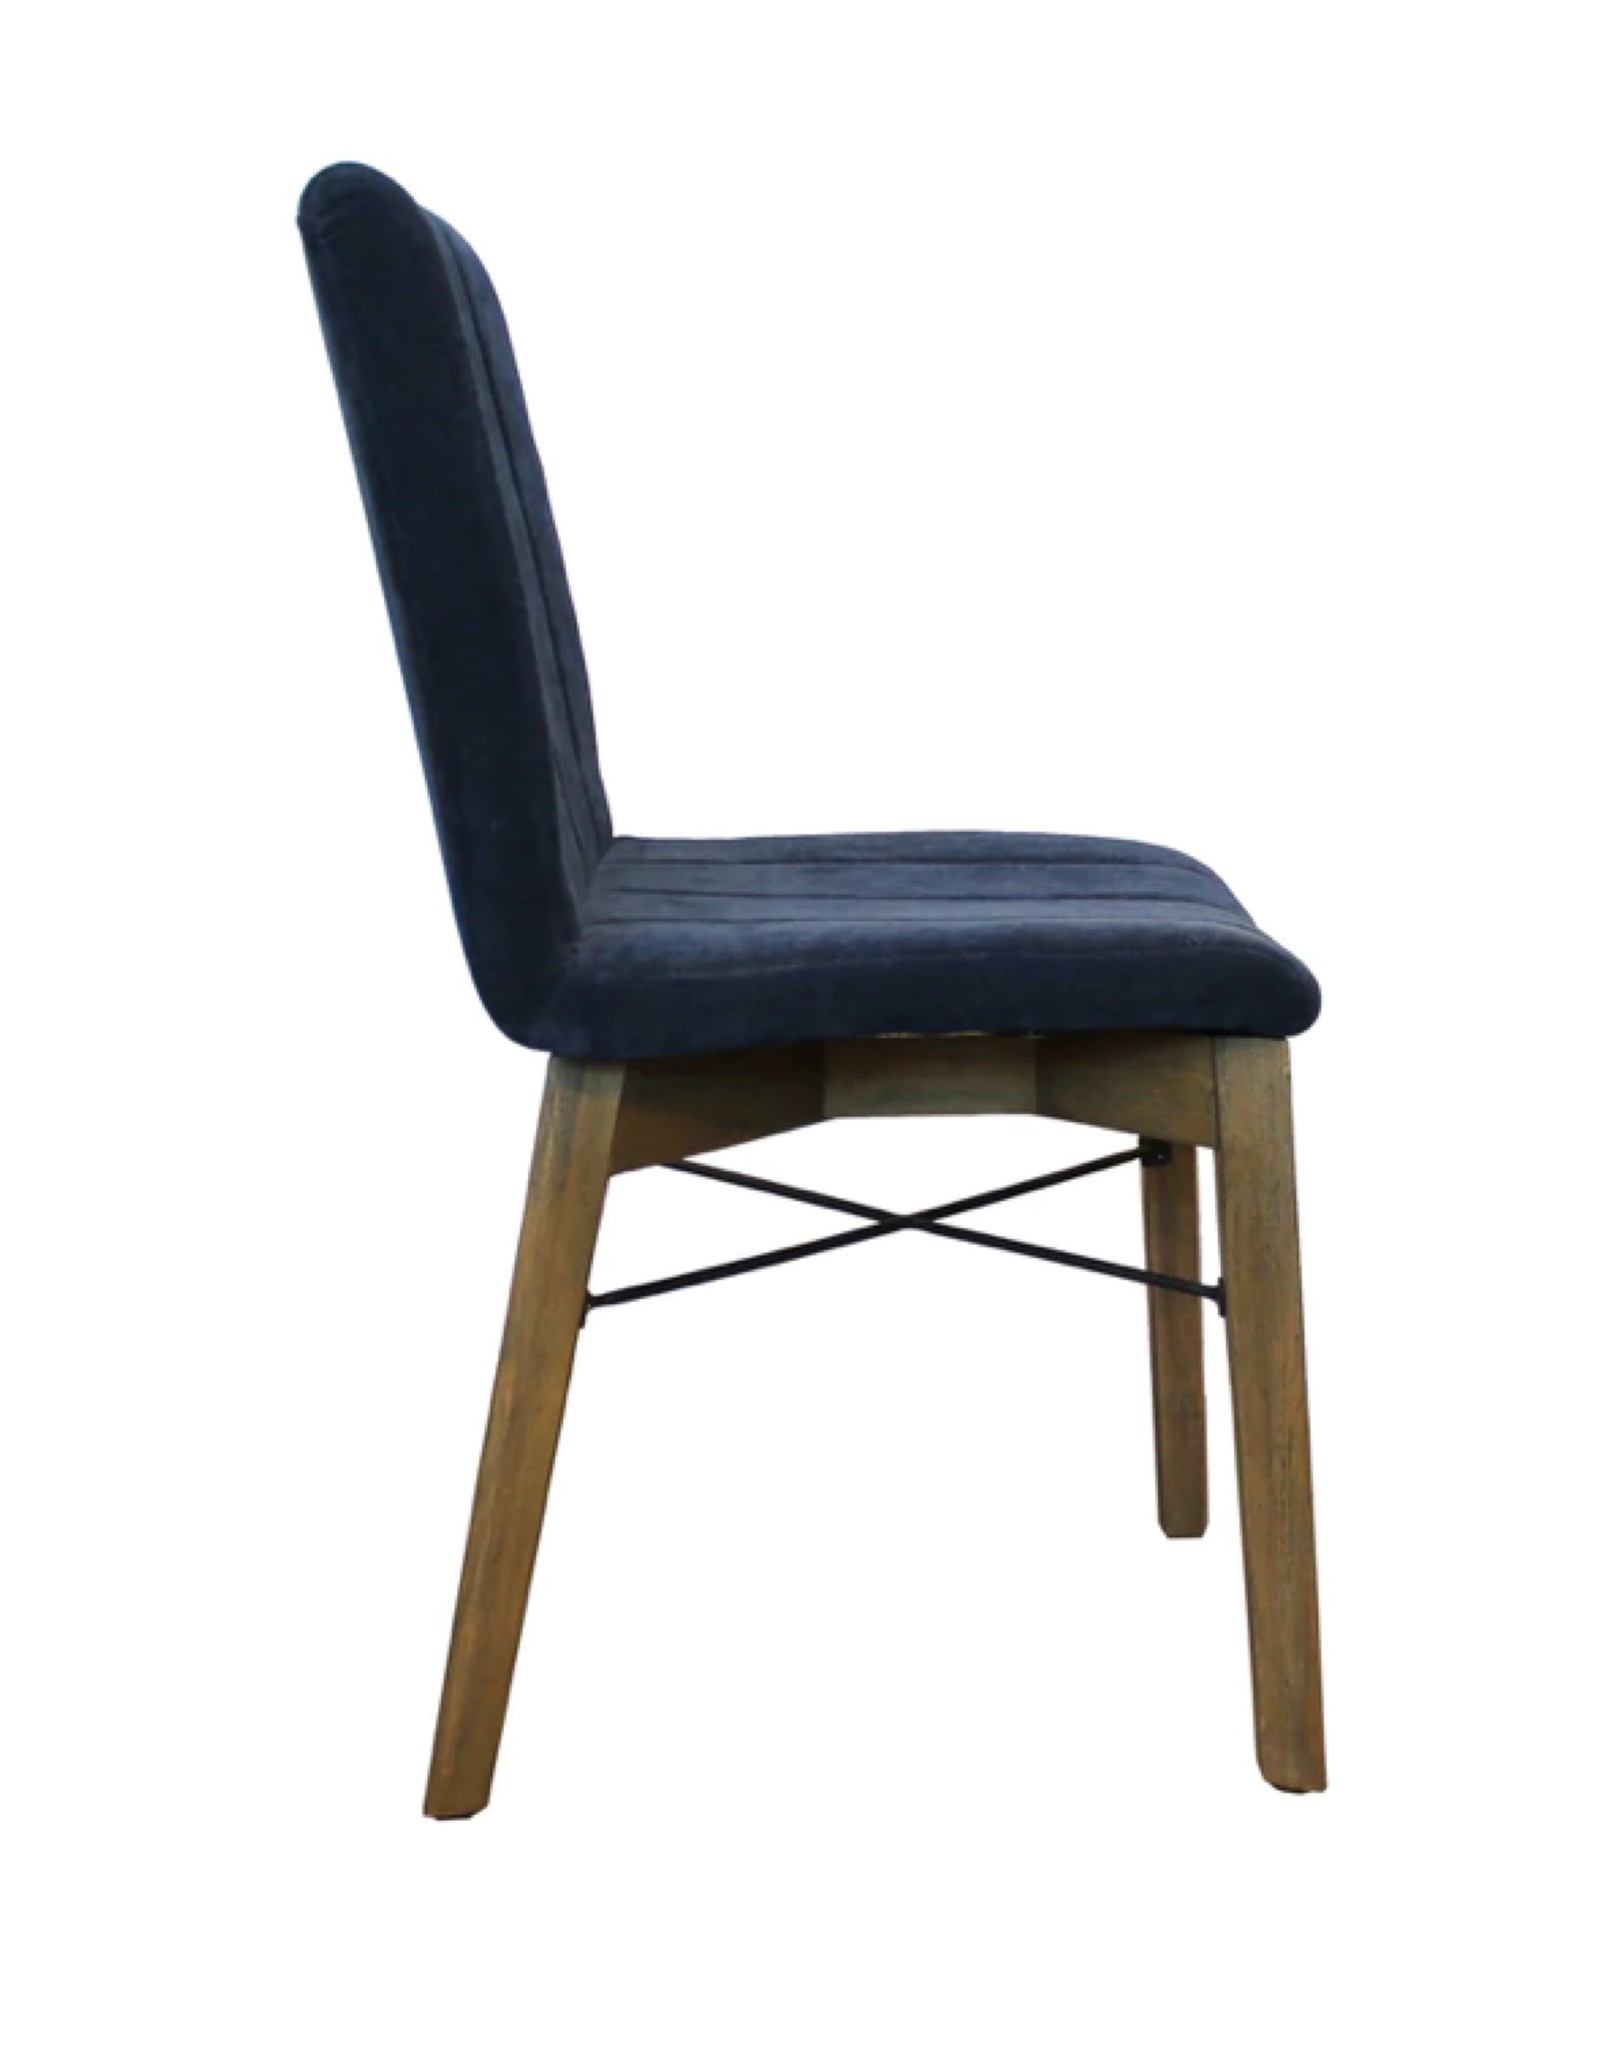 LH Imports LH West Dining Chair WES025